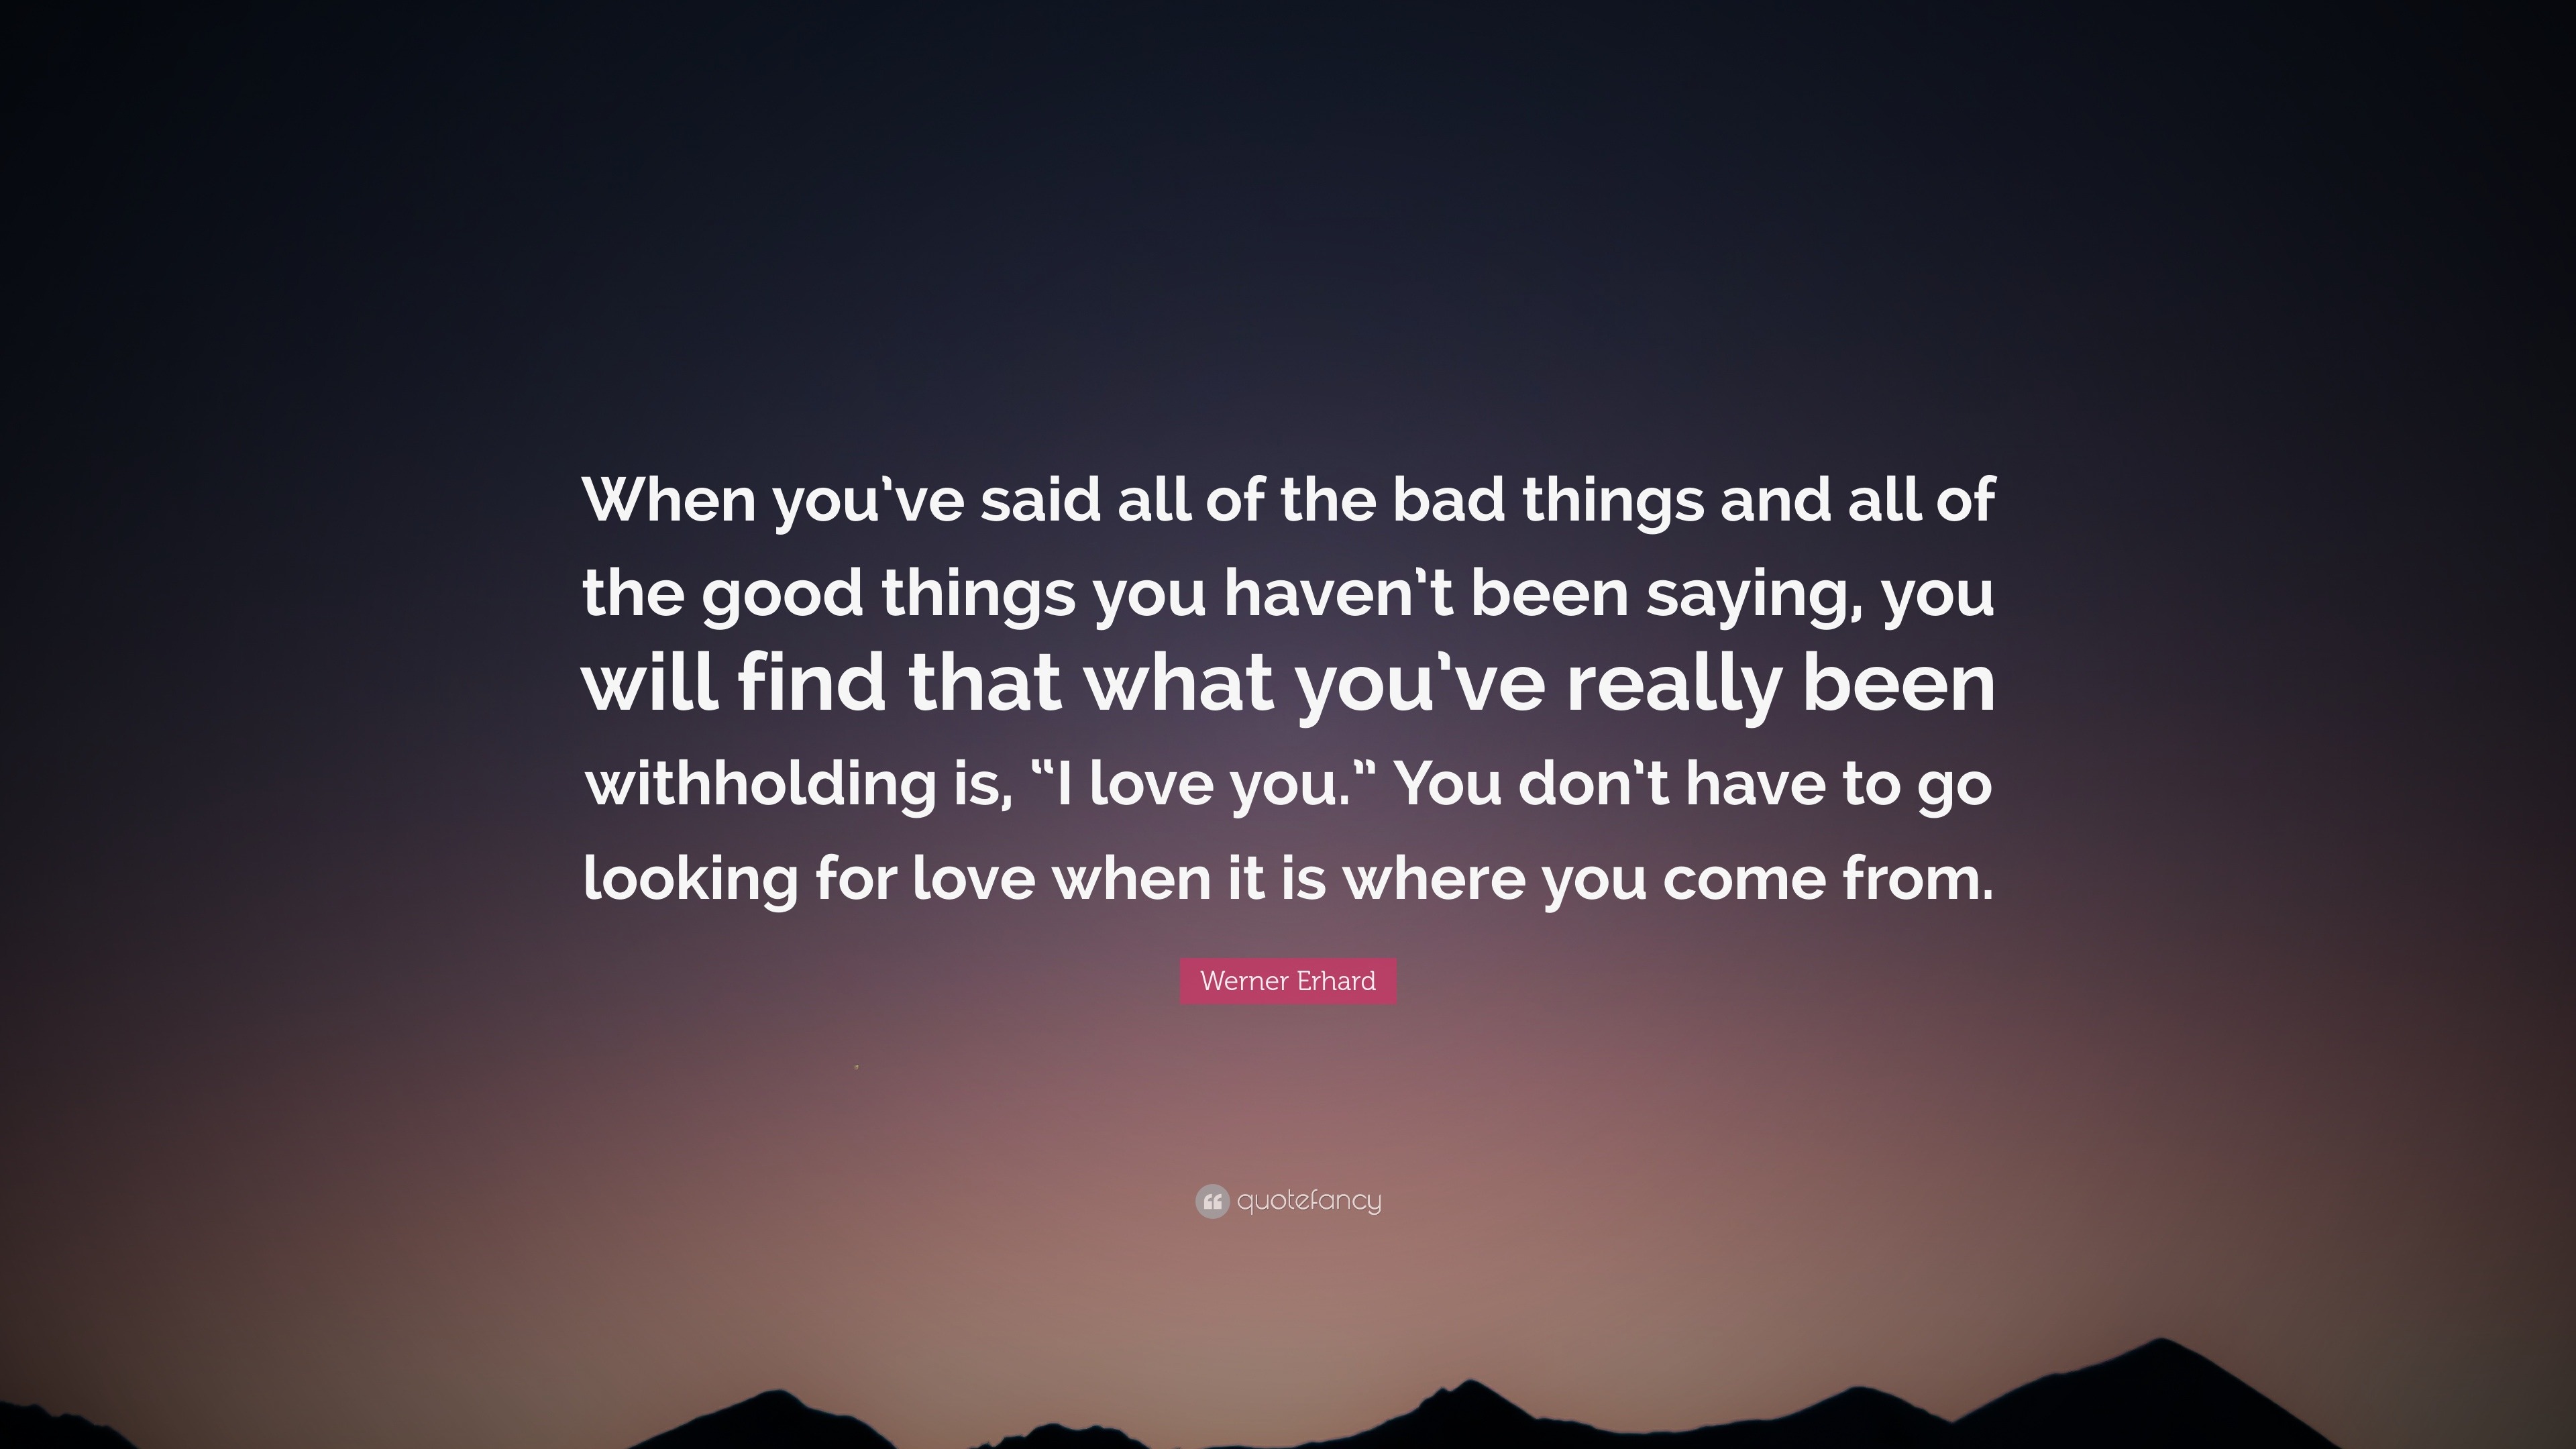 Werner Erhard Quote “When you ve said all of the bad things and